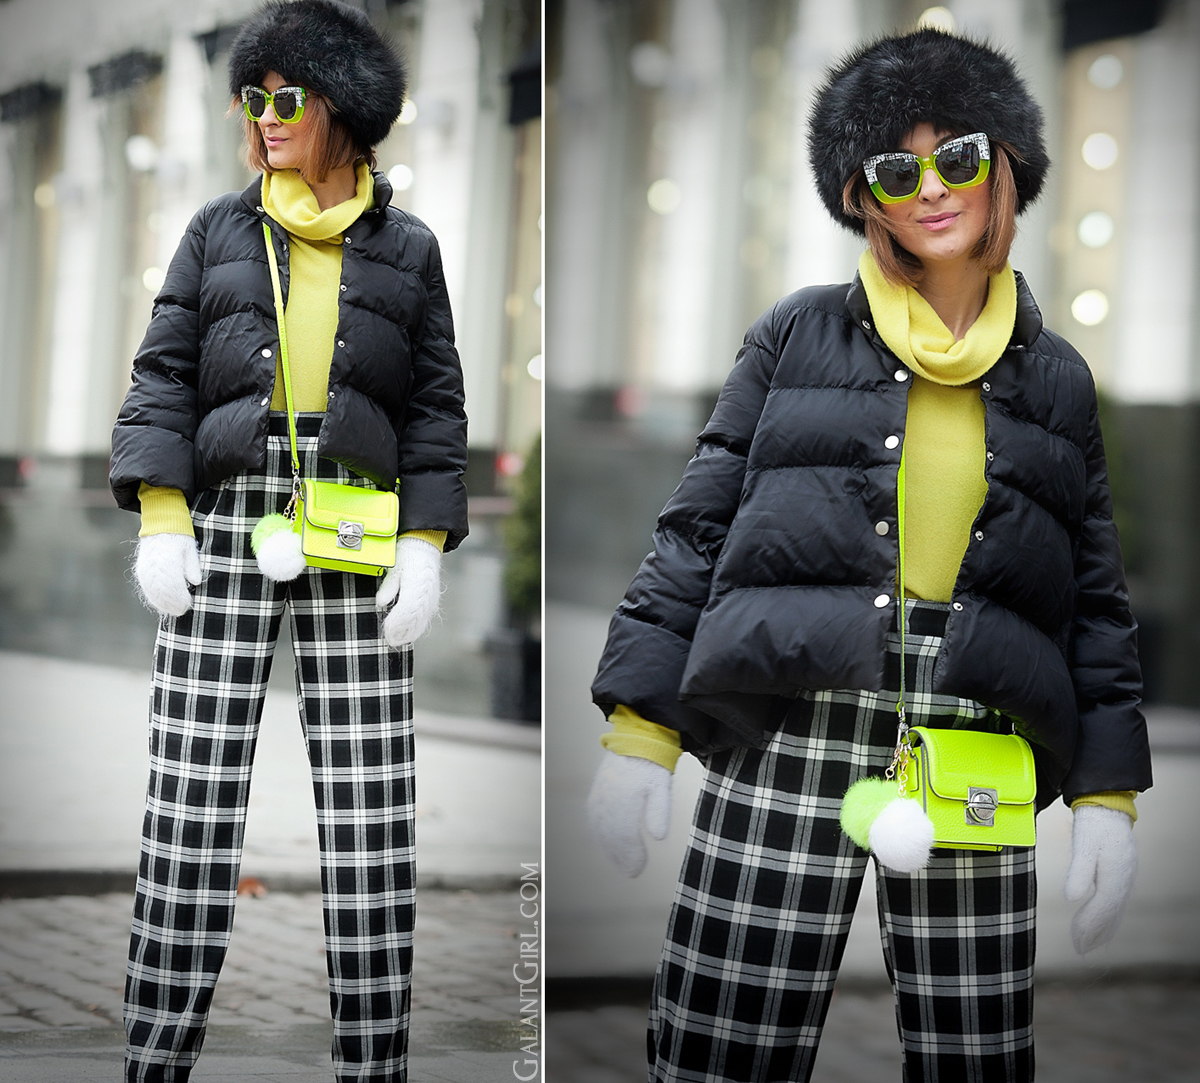 winter outfit with neon accents, JAX Marc by Marc Jacobs cross body bag, galant girl, plaid trousers ASOS, 